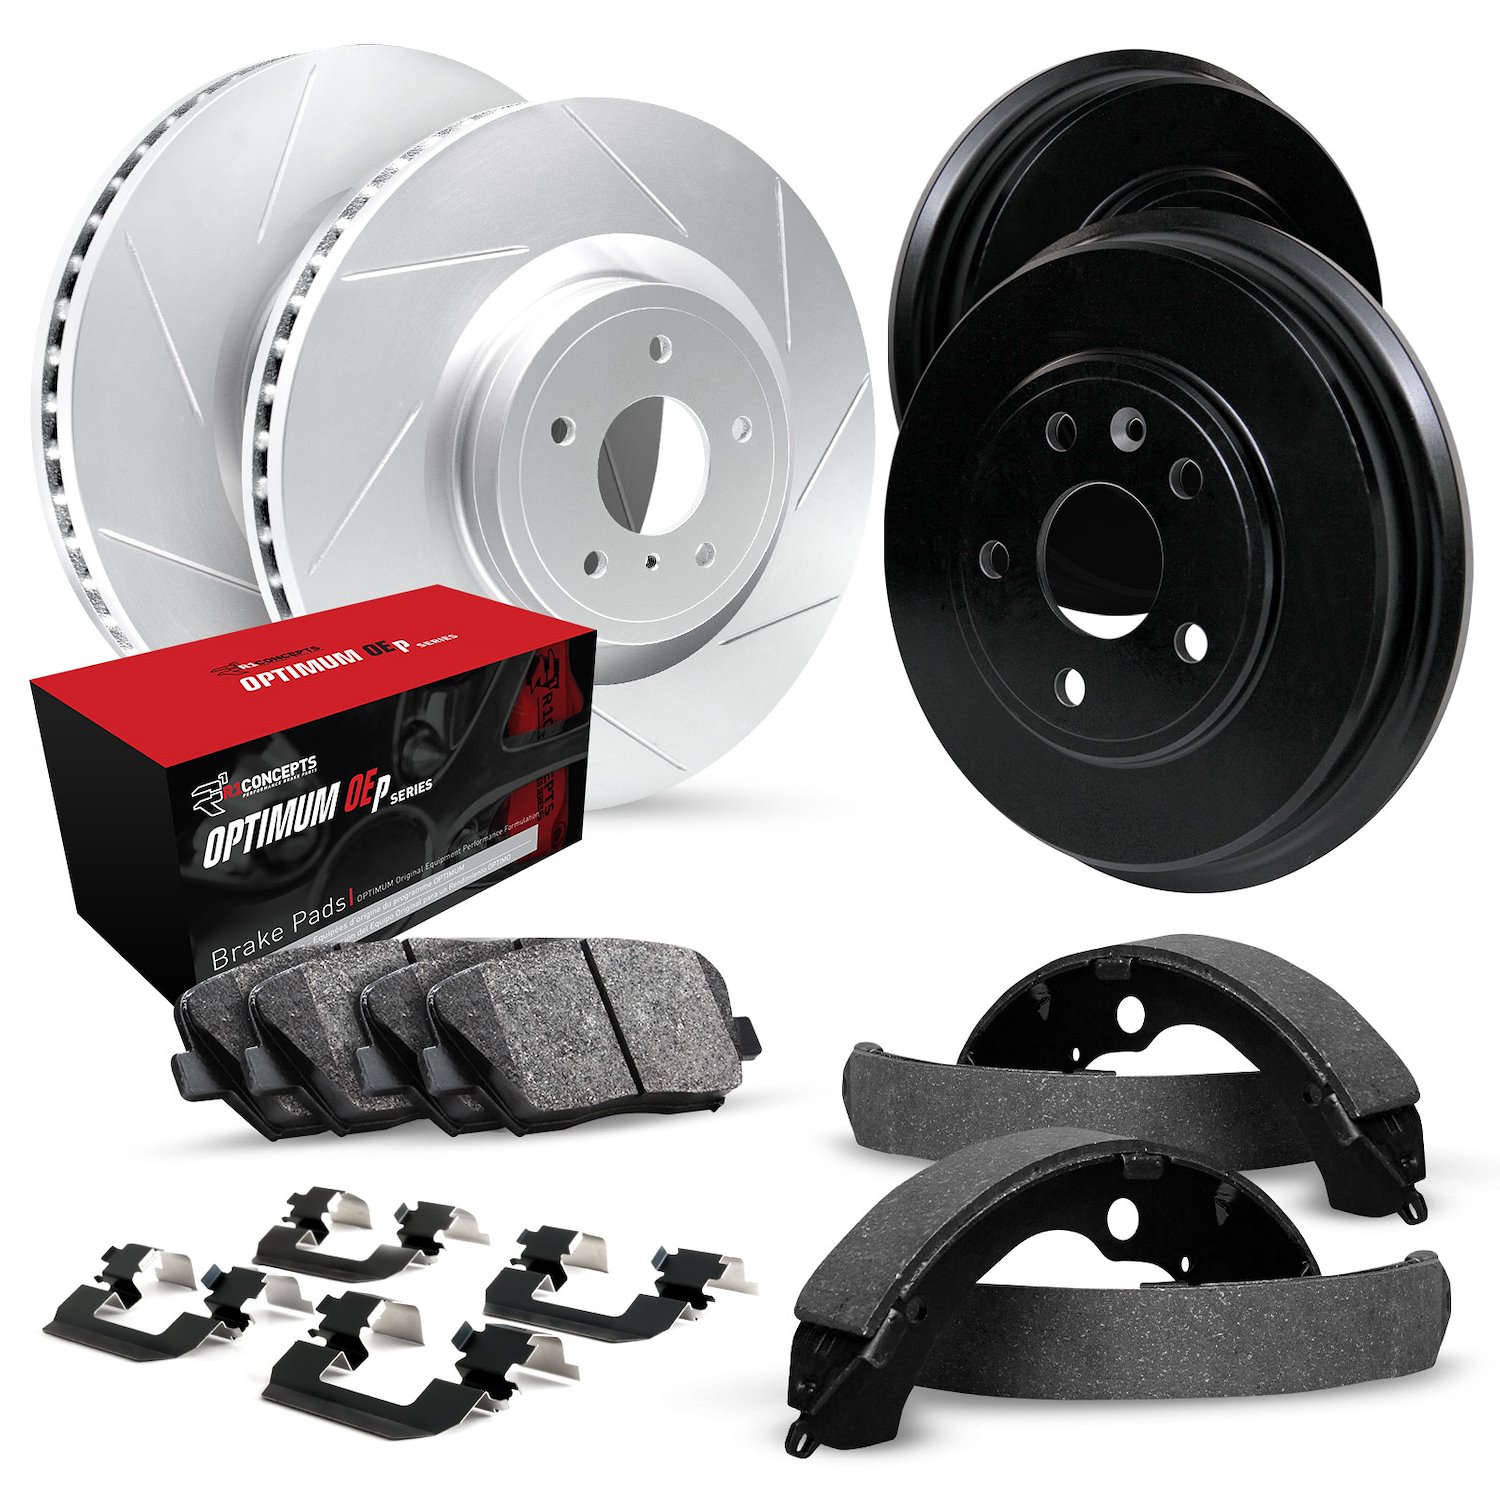 GEO-Carbon Slotted Brake Rotor & Drum Set w/Optimum OE Pads, Shoes, & Hardware, 1995-2001 GM, Position: Front & Rear